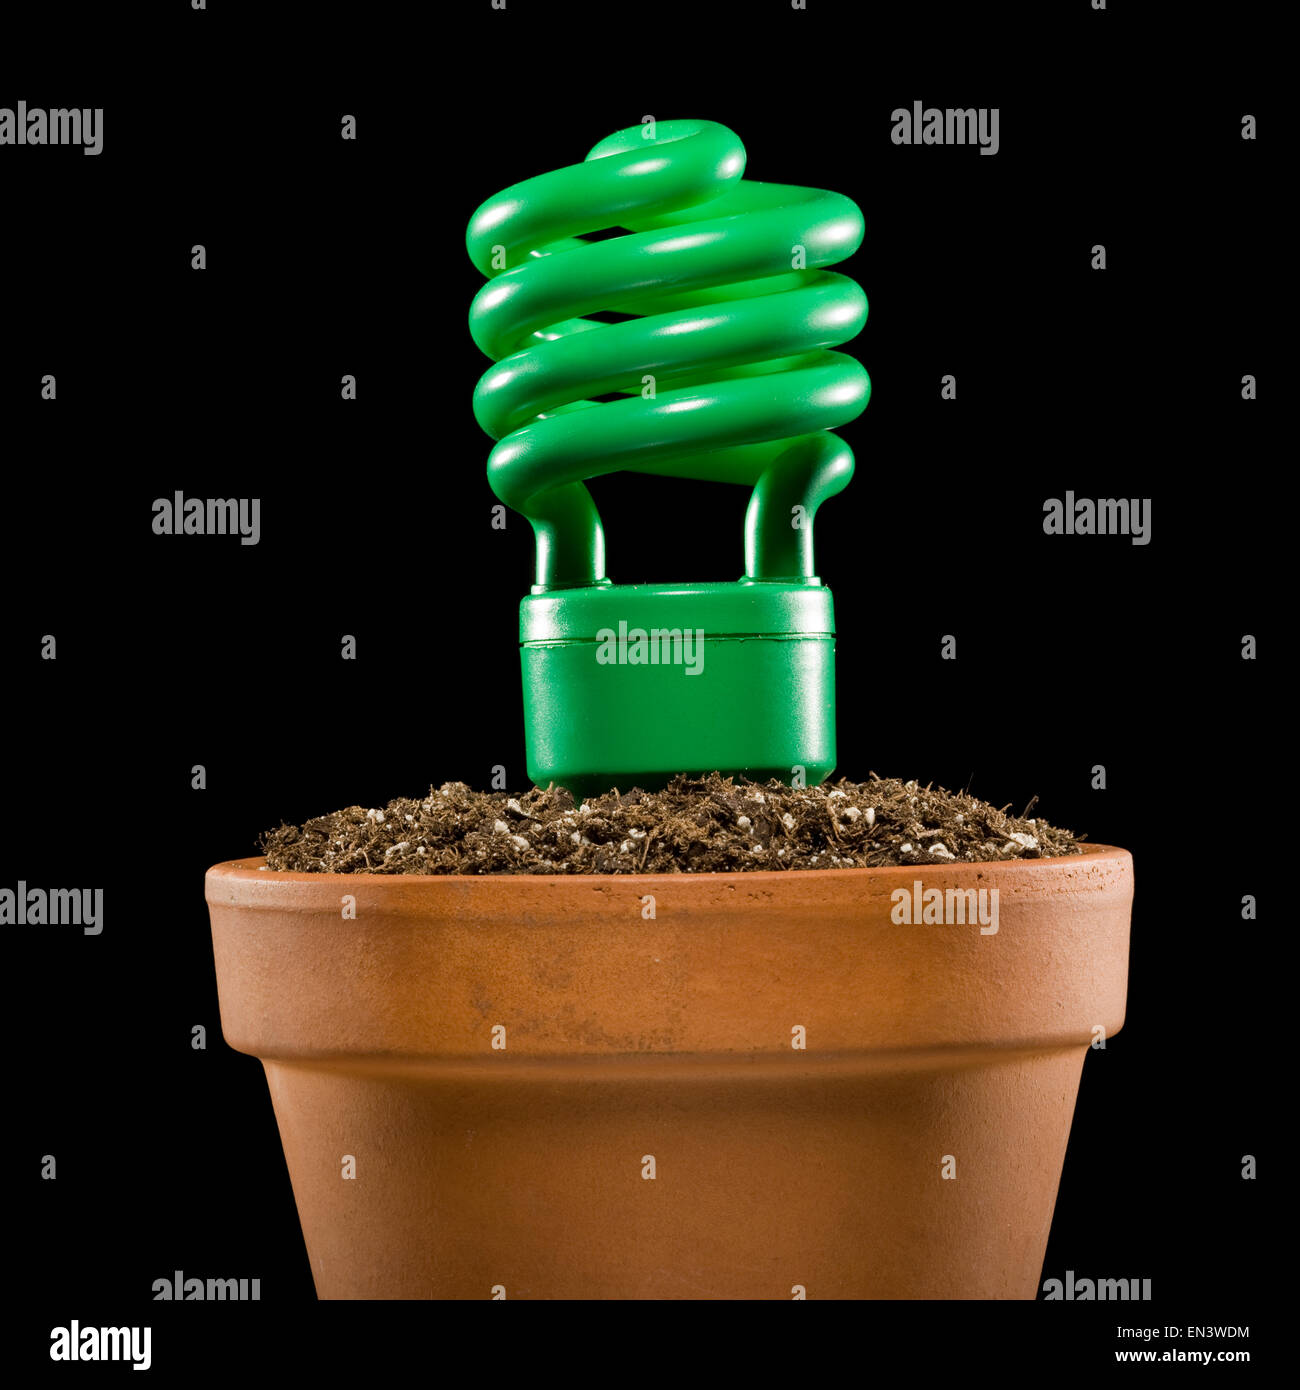 light bulb planted in a pot of soil Stock Photo